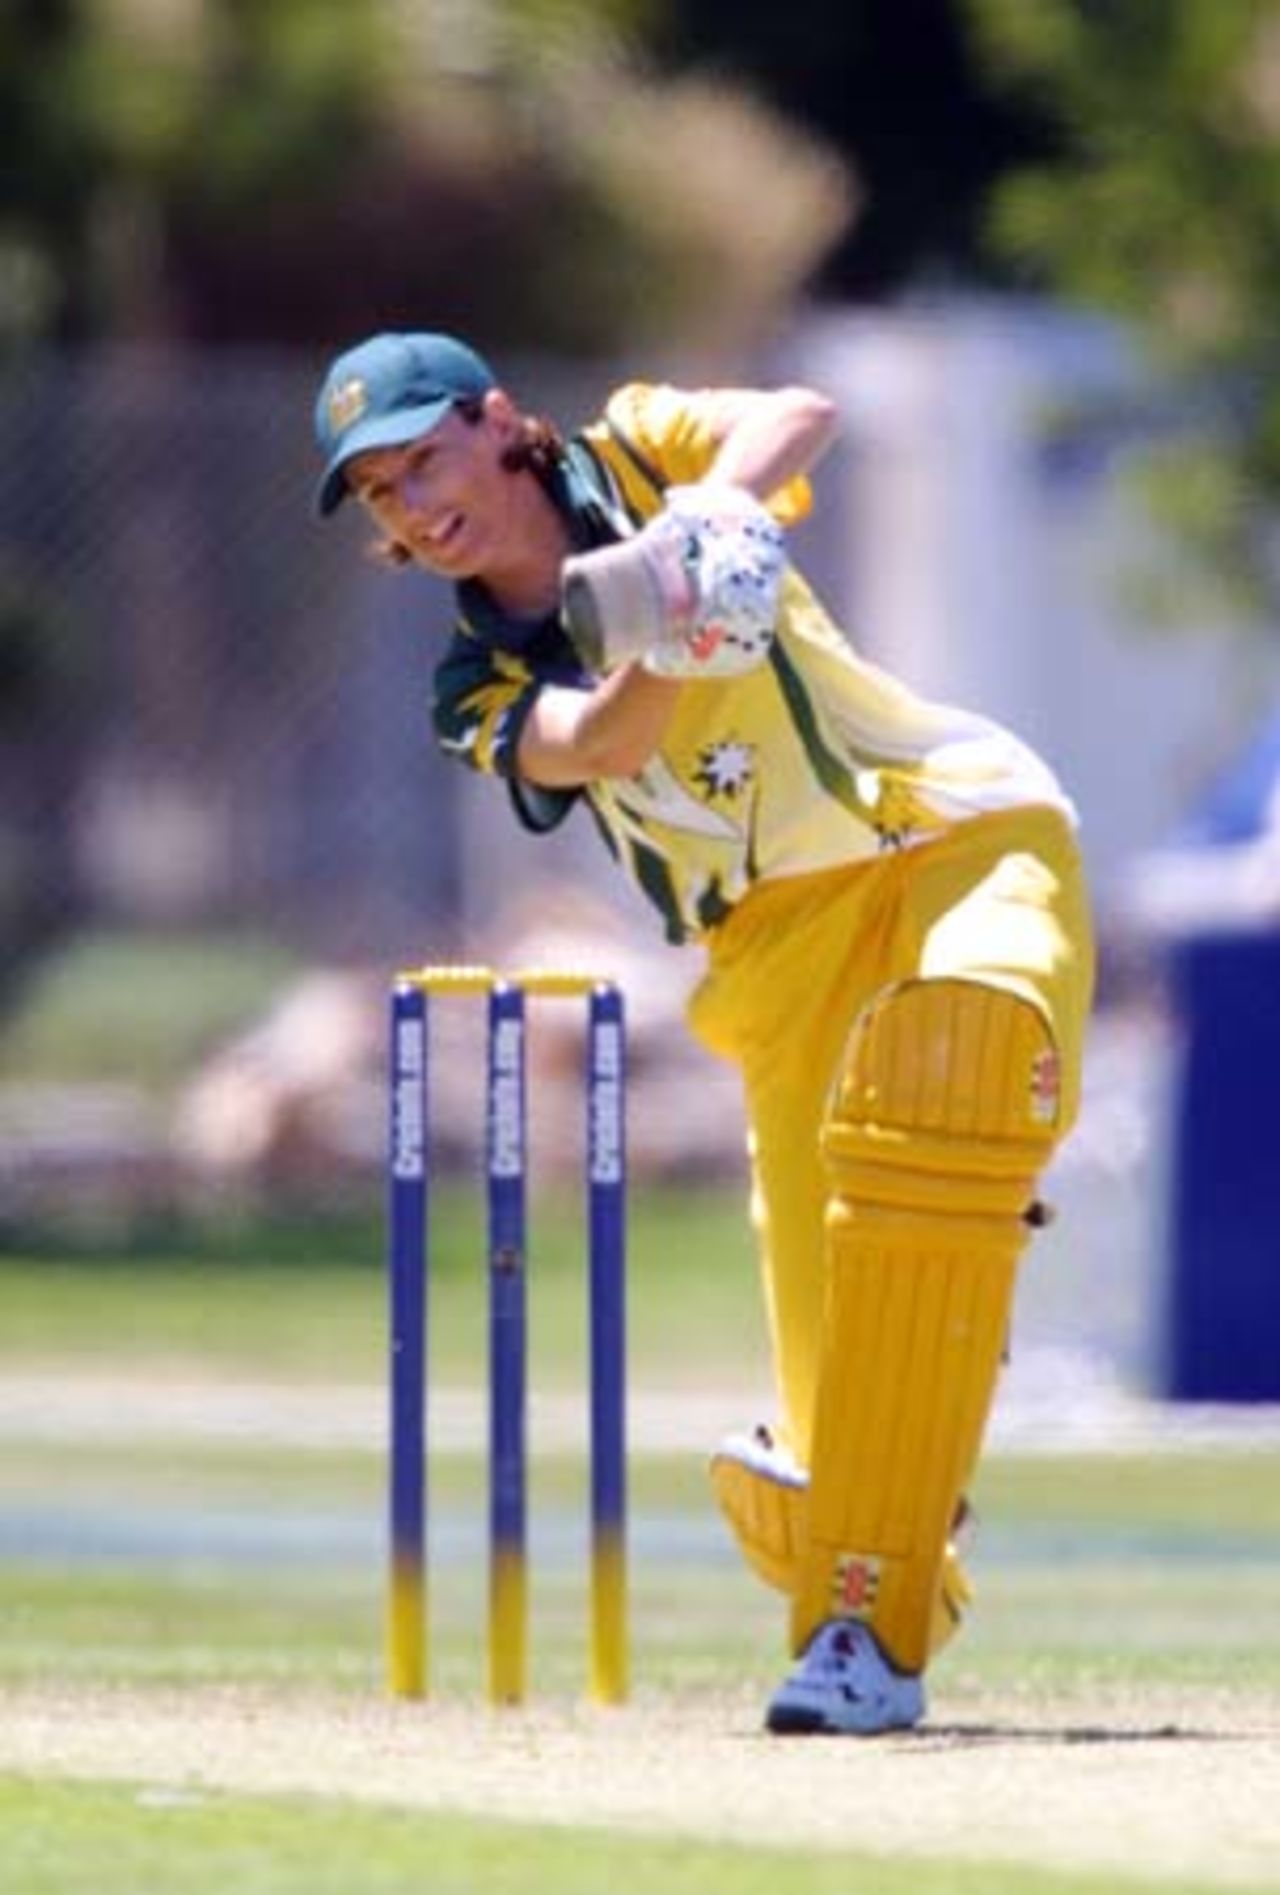 Australia v South Africa at the 2000 CricInfo Women's World Cup, played at the BIL Oval , Lincoln, 18th December